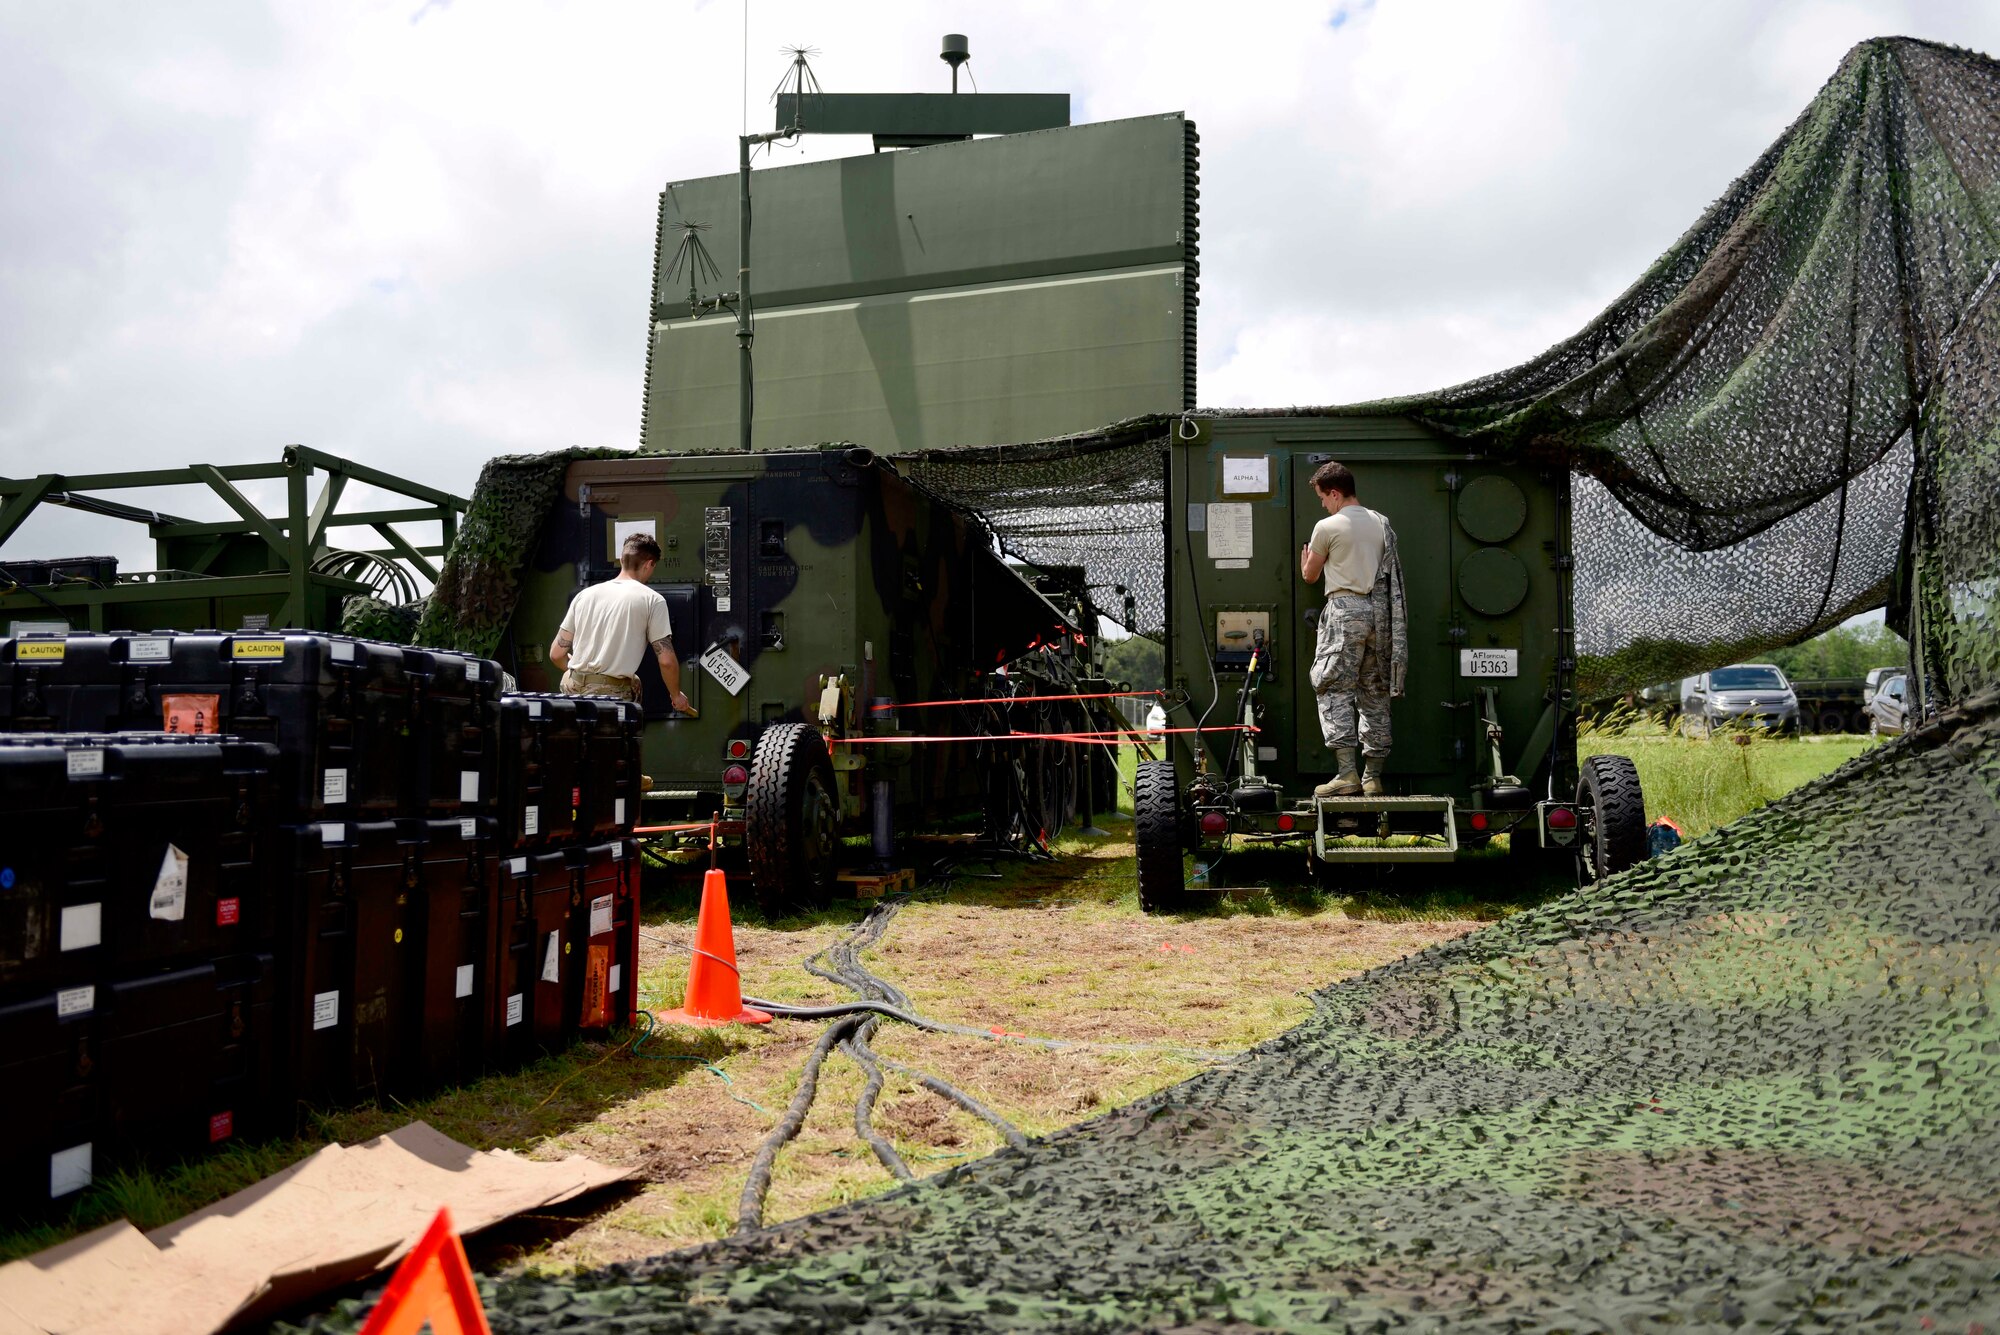 Airmen from the 606th Air Control Squadron prepare for work on the TPS-75 radar system at Pula Airport, Croatia, May 28, 2019. The 606th ACS is in Croatia to support Astral Knight 2019, which aims to demonstrate the integration, coordination, and interoperability of joint existing command and control at the operation and tactical levels. (U.S. Air Force photo by Staff 
Sgt. Tory Cusimano)